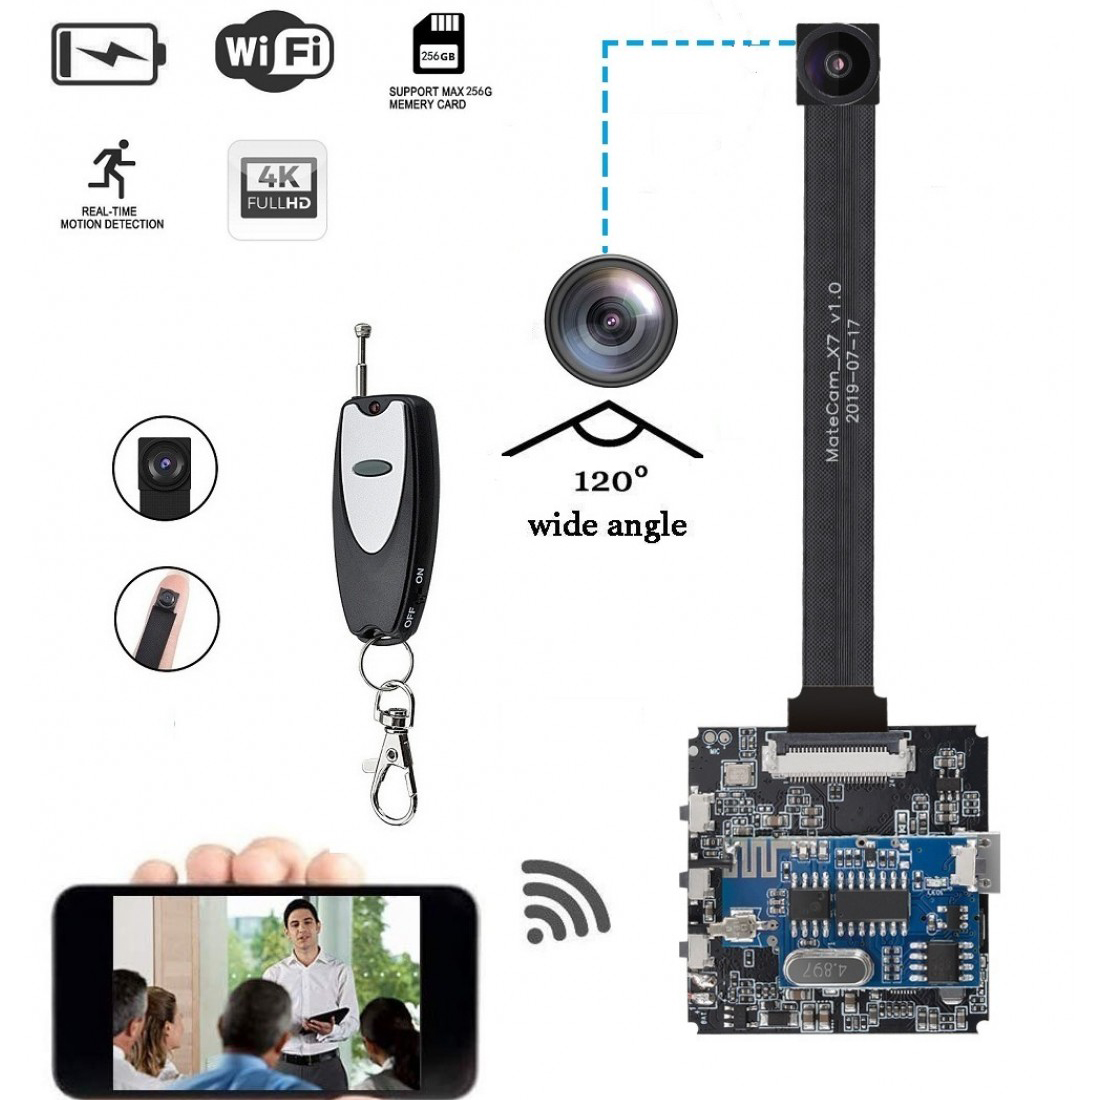 Professional China SPY CAMERAS WITH AUDIO AND VIDEO-
 4K Ultra HD DIY Wireless Camera 120 Degree Mini DVR Motion Detection Nanny Cam Security System APP Control Action Camera up to 256GB – MATECAM